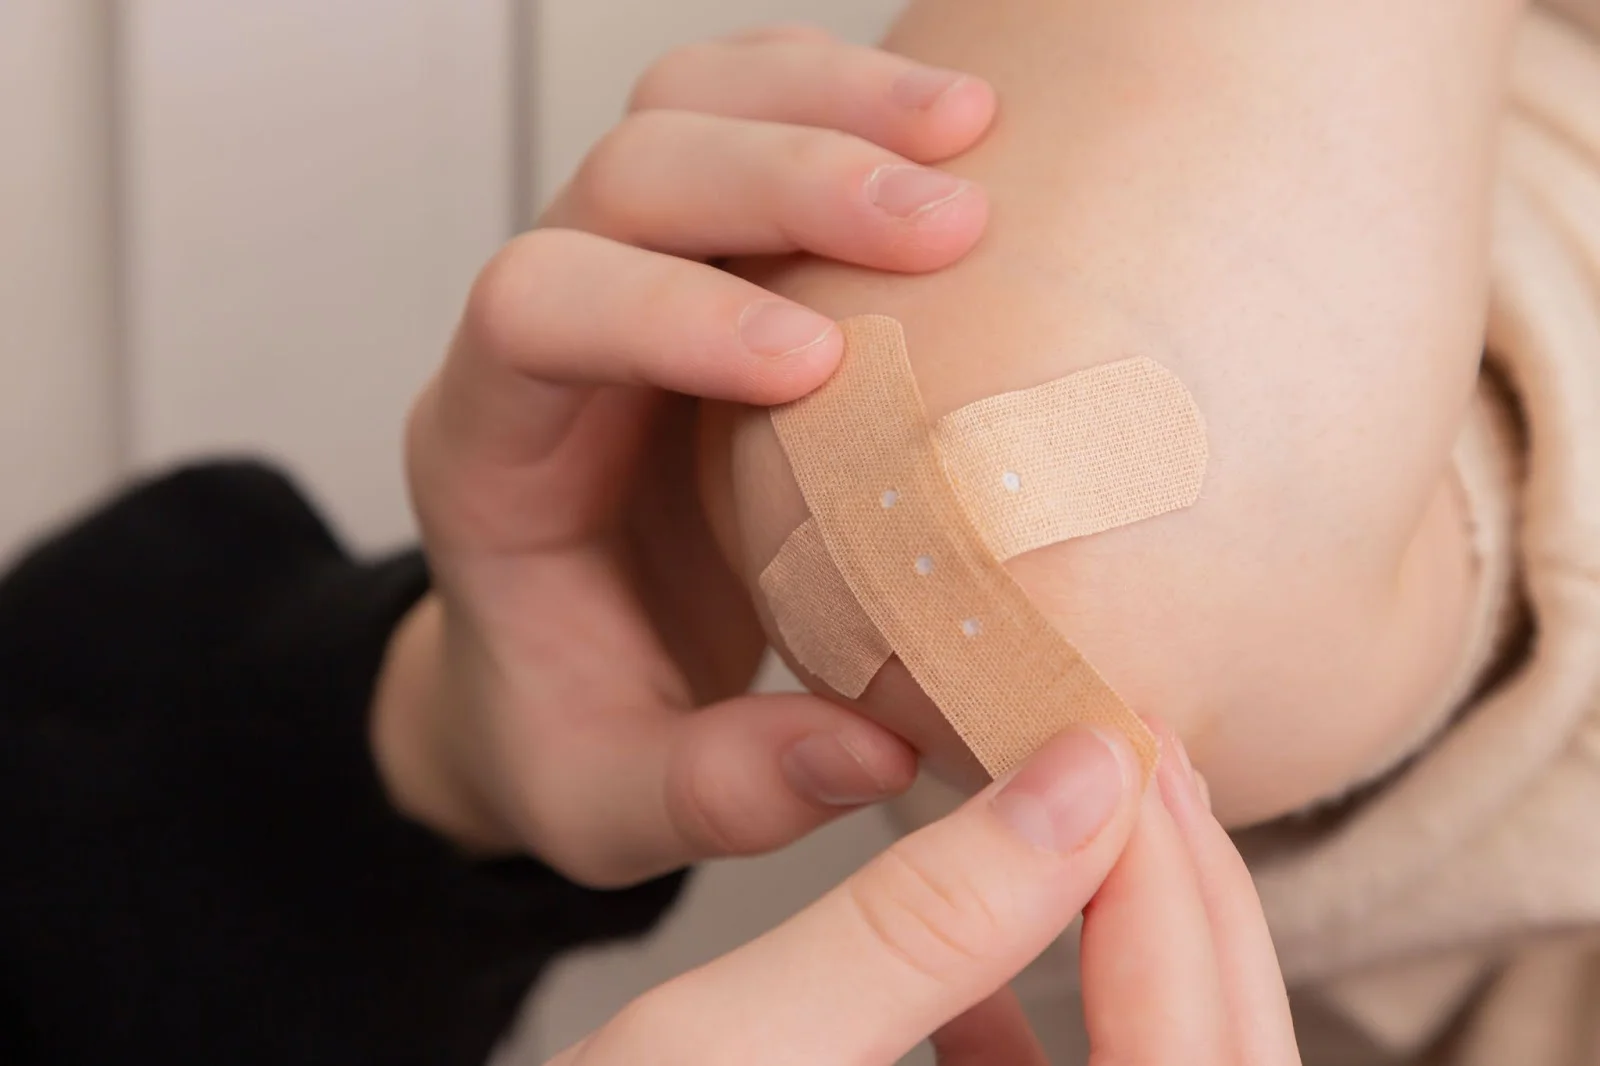 American scientists have created a unique patch that heals wounds more effectively